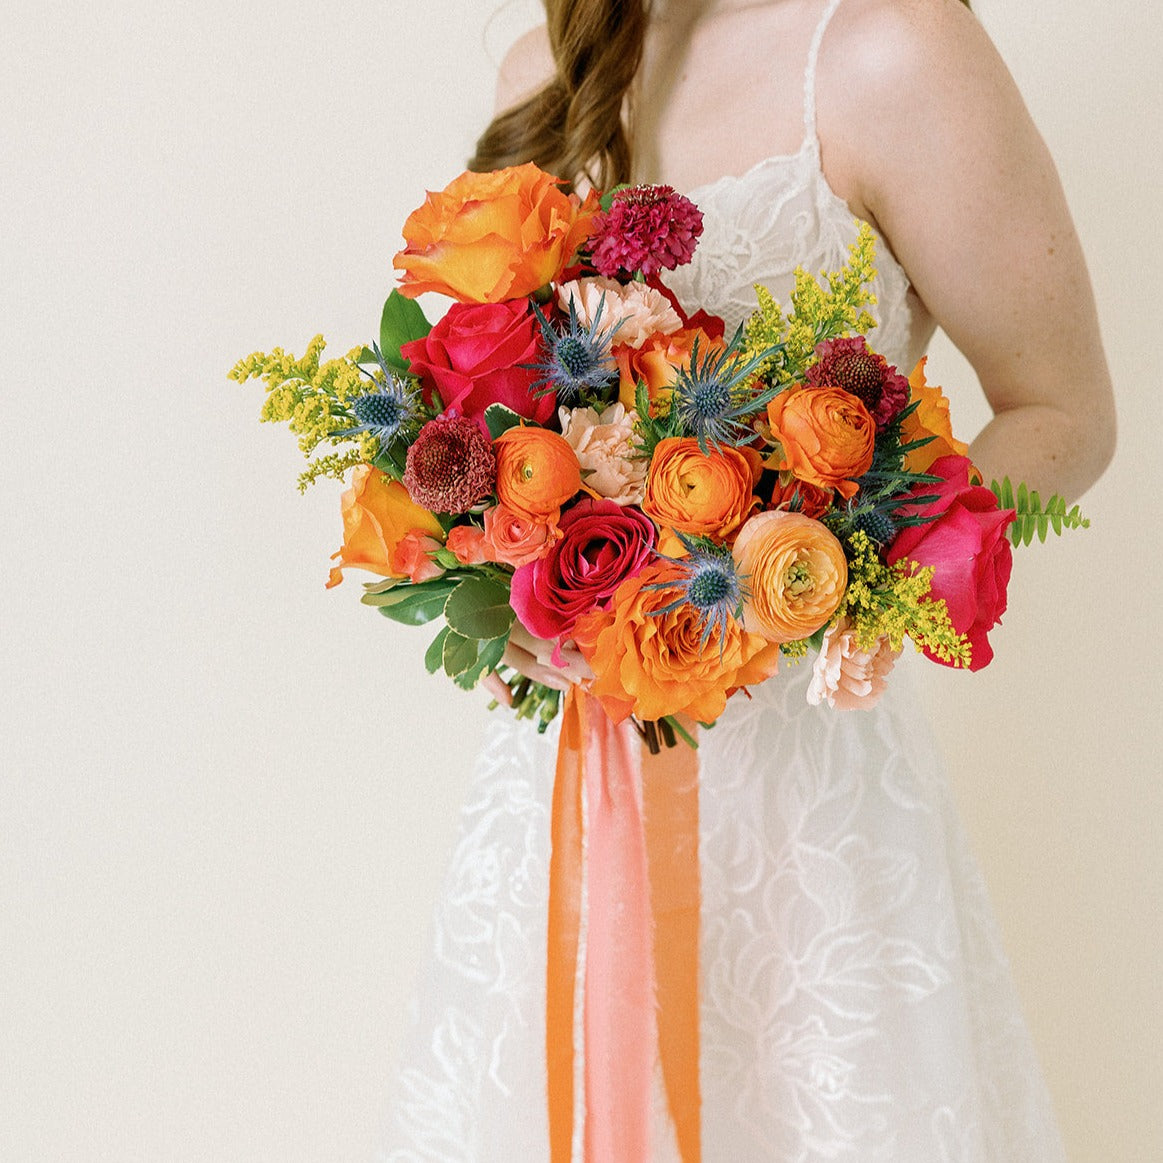 Colorful Fiesta Bridal Bouquet with Vibrant Colors  